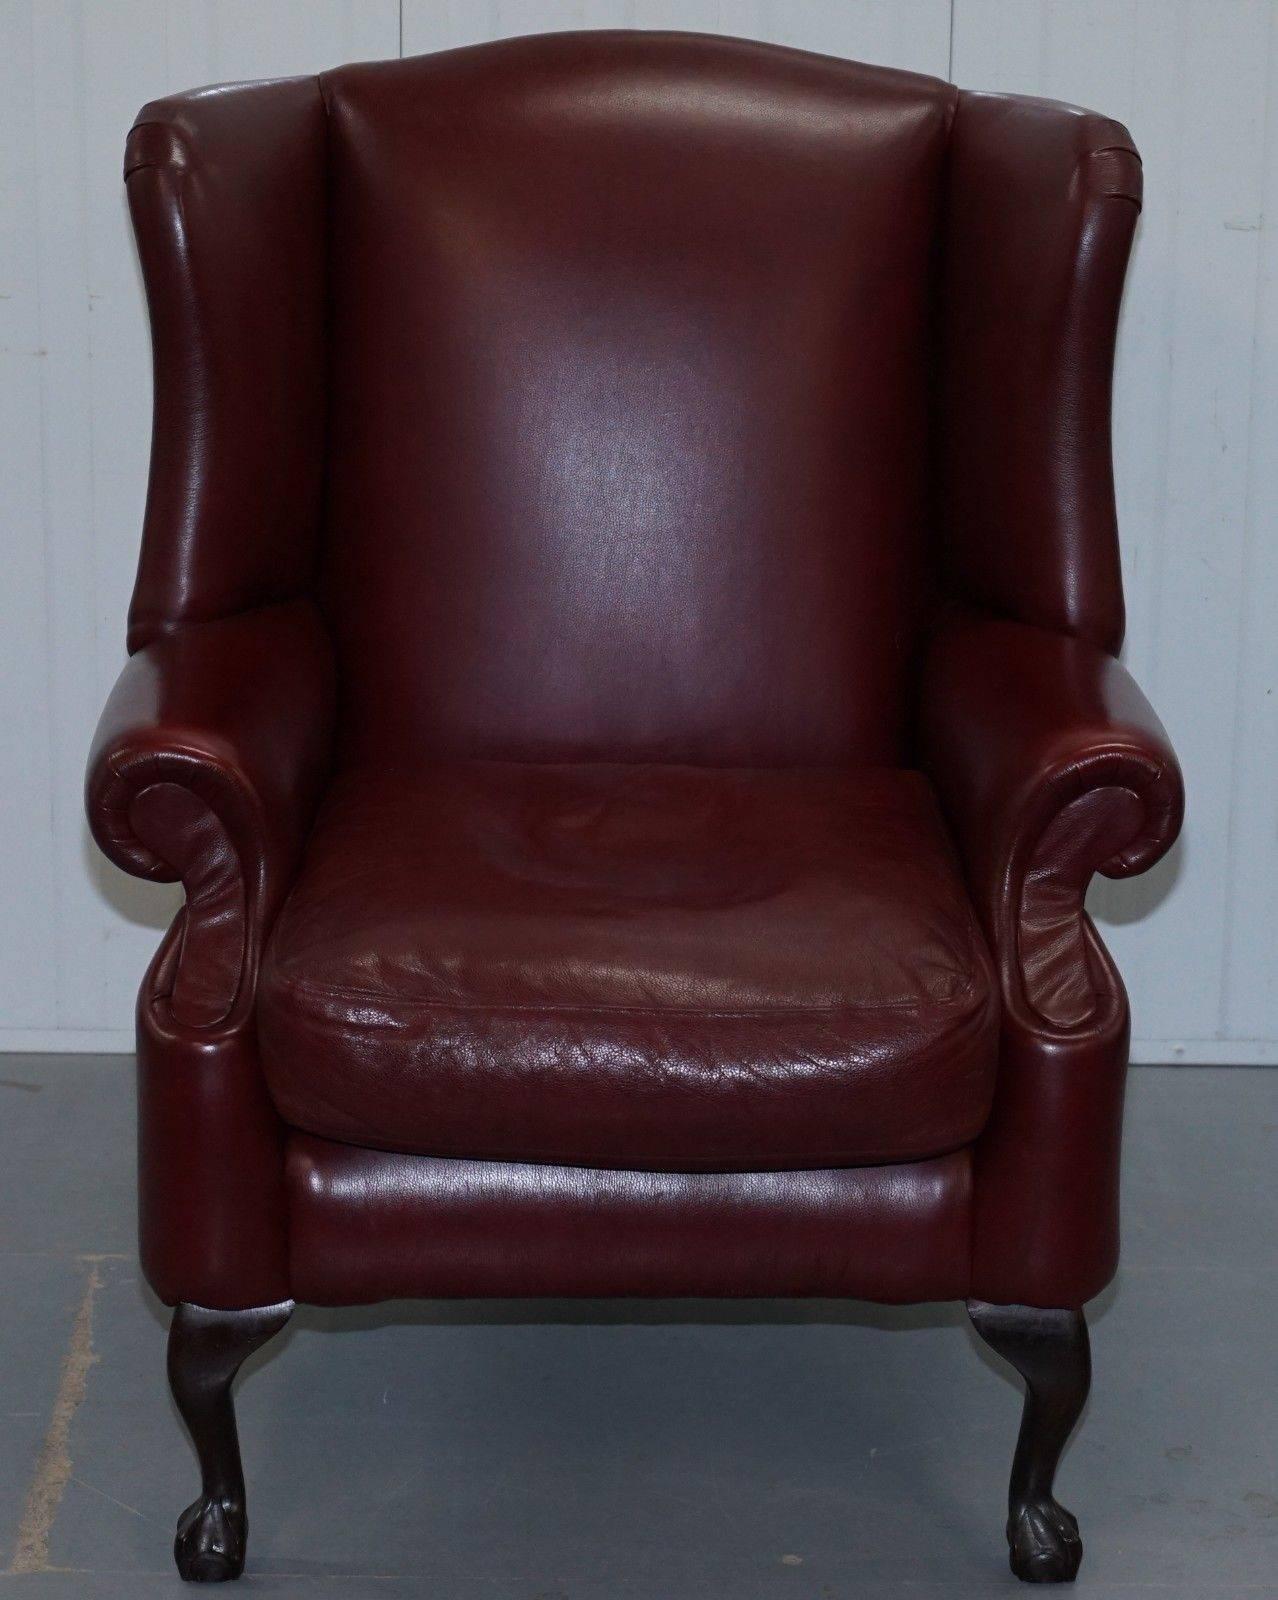 We are delighted to offer for sale this very nice oxblood leather wingback armchair with claw and ball feet

A very good looking and well-made armchair in lightly restored very good condition throughout, we have deep cleaned hand condition waxed